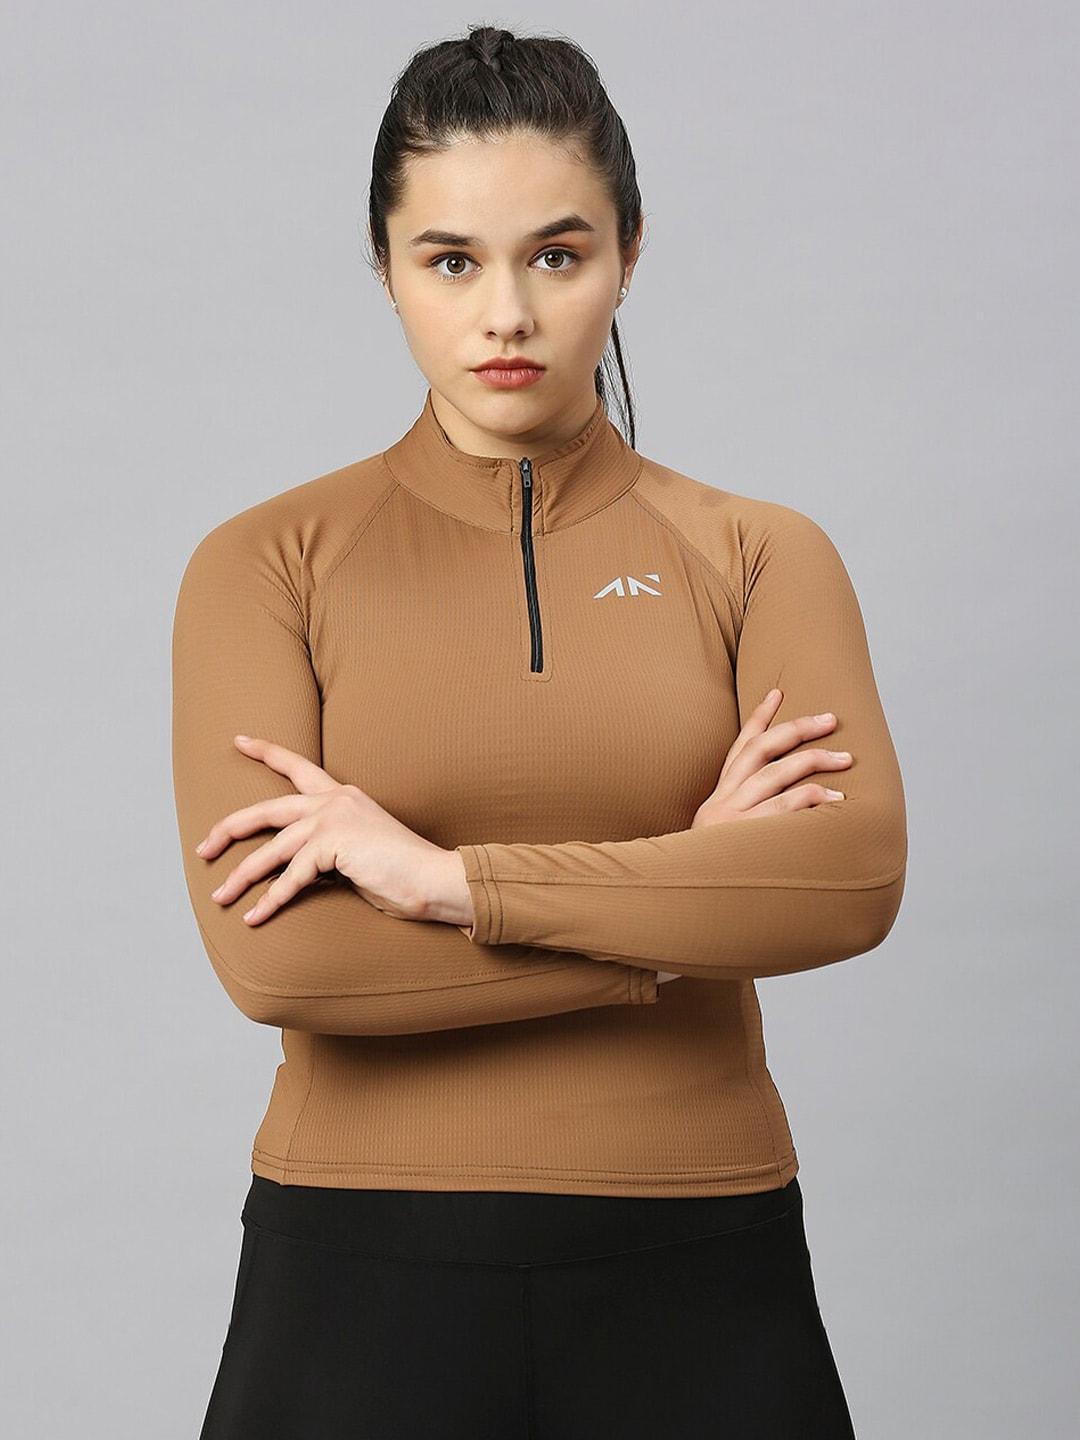 aesthetic nation high neck fitted sports top